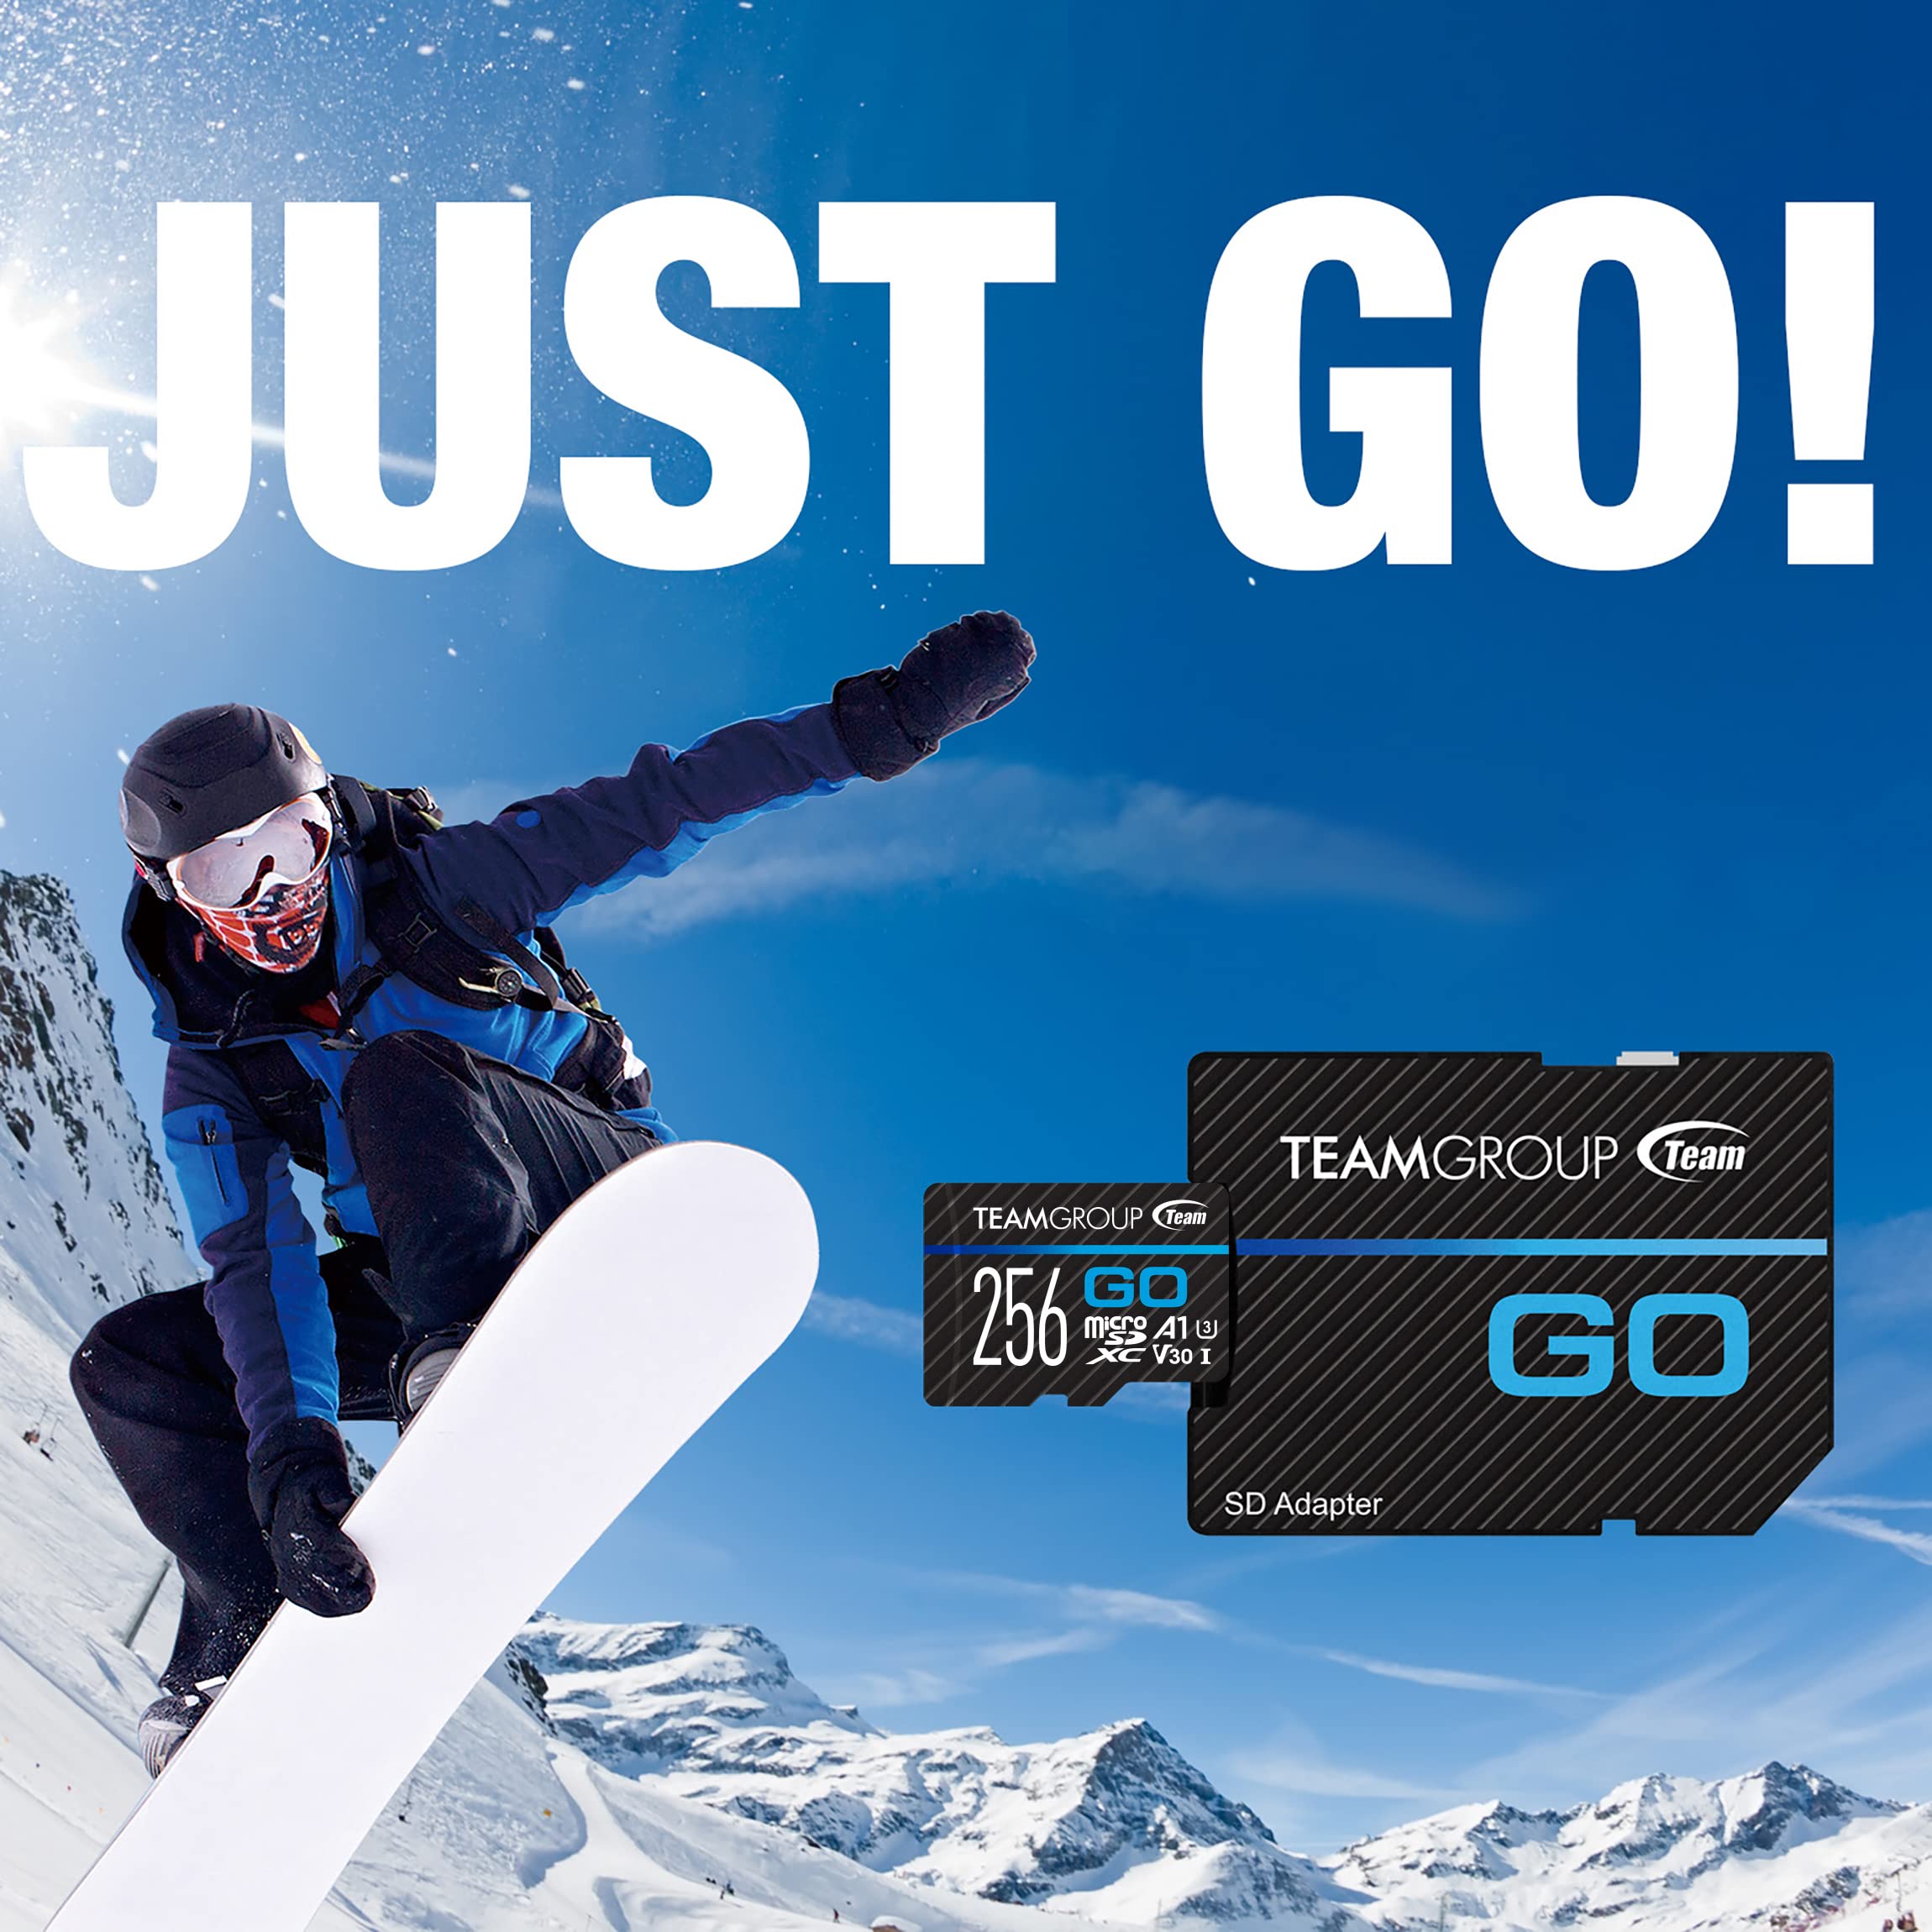 TEAMGROUP GO Card 512GB 2 Pack Micro SDXC UHS-I U3 V30 4K, R/W up to 100/90 MB/s for GoPro & Drone & Action Cameras High Speed Flash Memory Card with Adapter for 4K Shooting TGUSDX512GU364